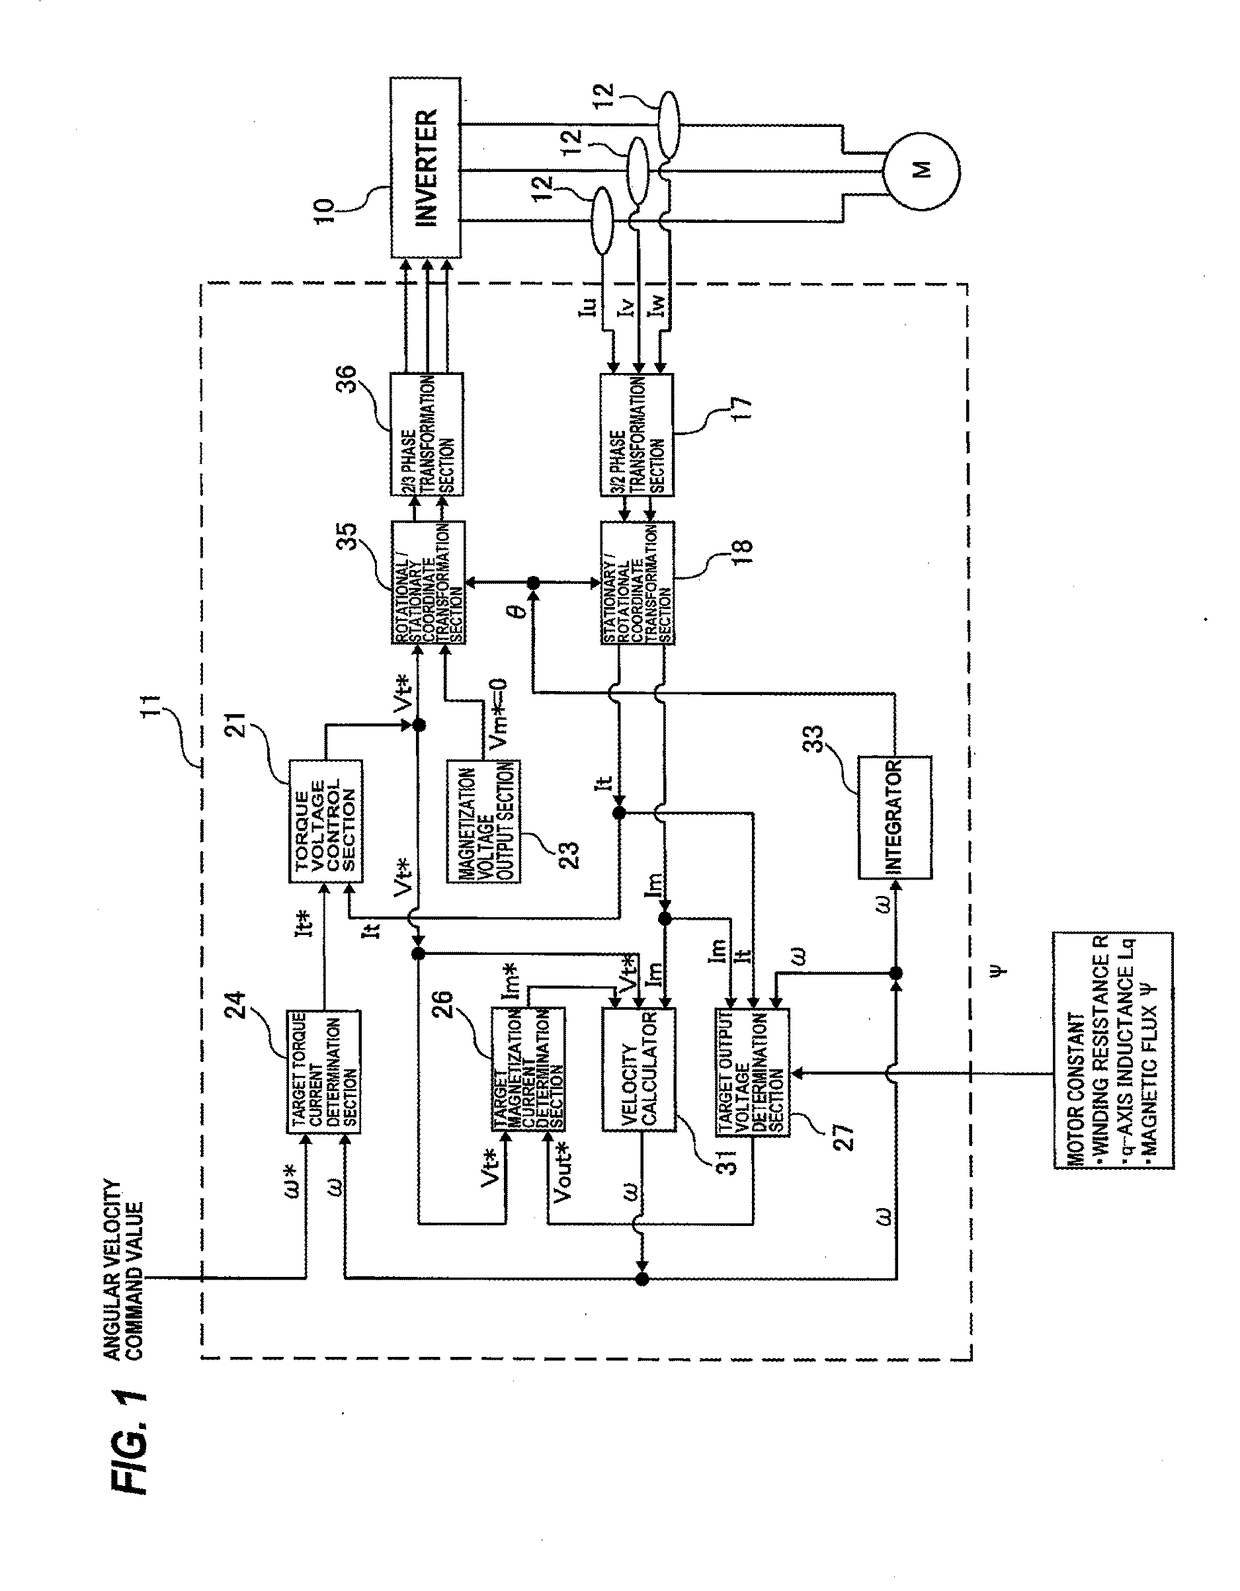 Driving apparatus for electric motor